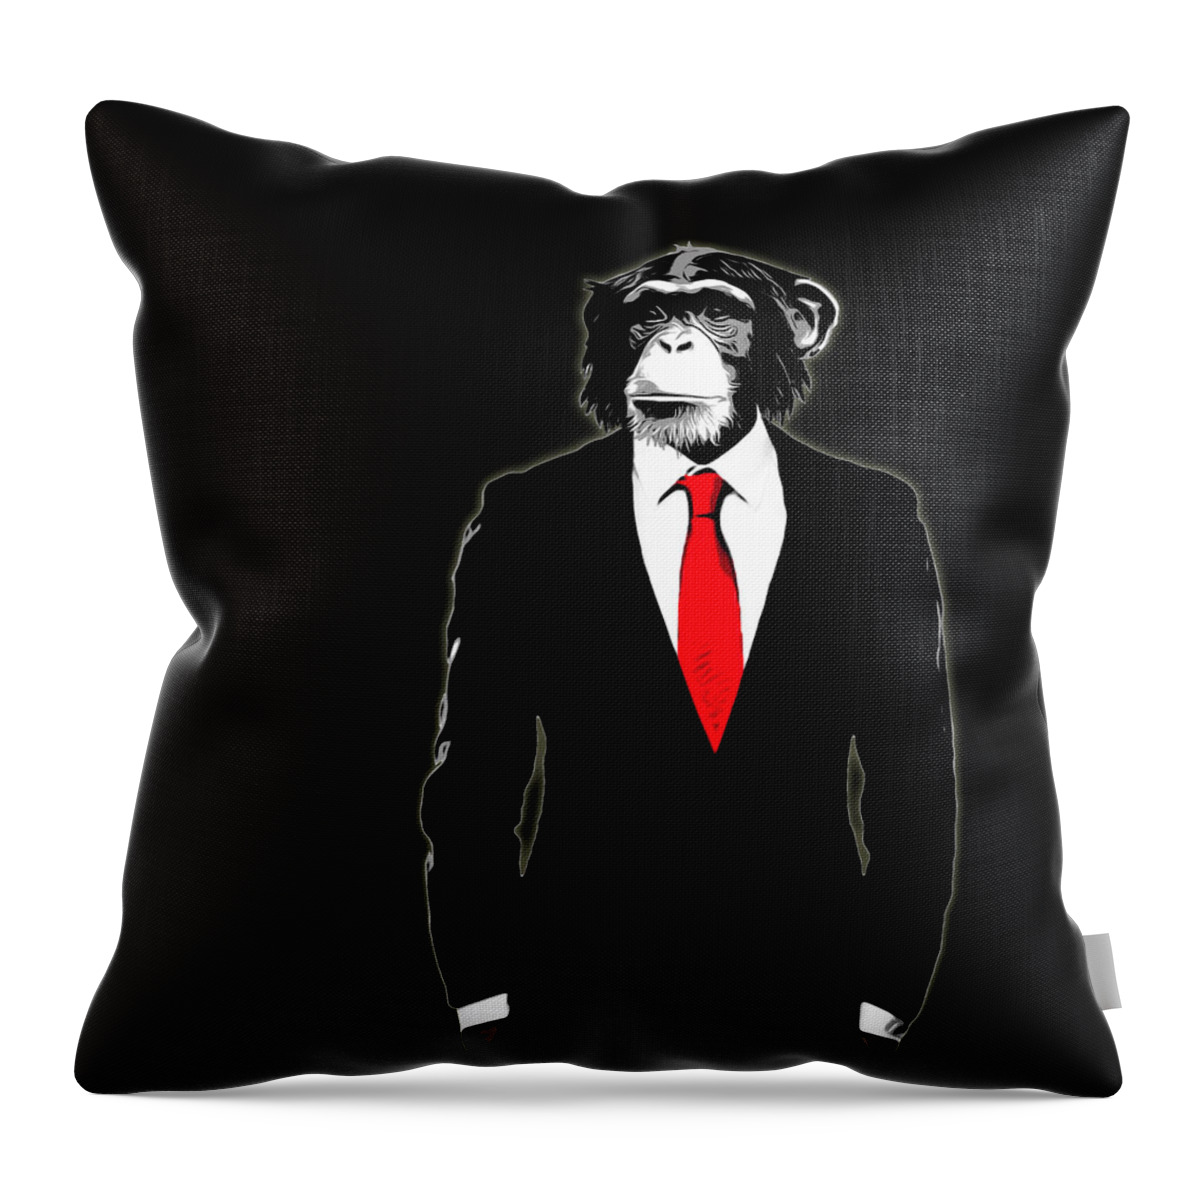 Monkey Throw Pillow featuring the painting Domesticated Monkey by Nicklas Gustafsson